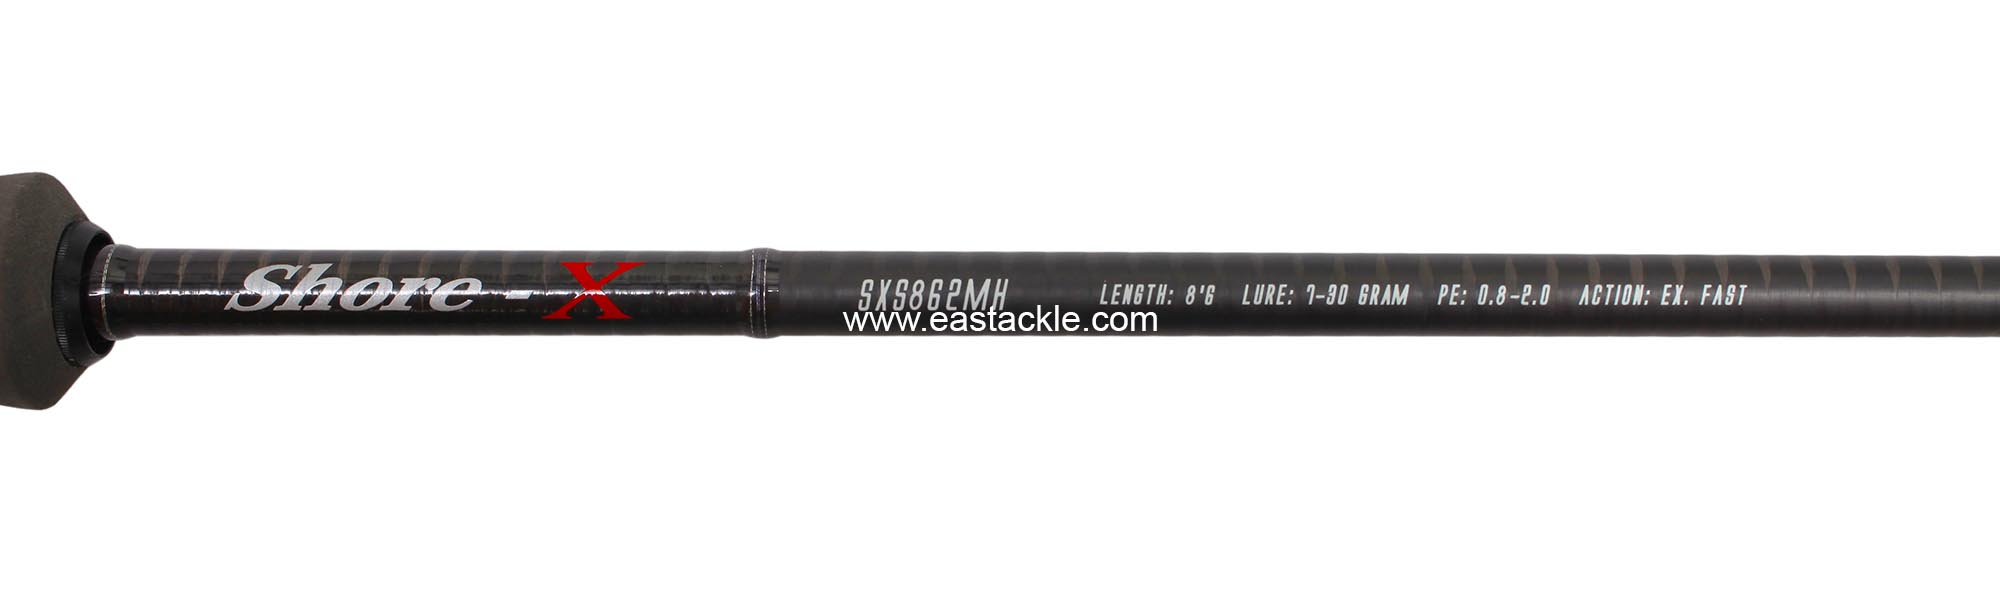 Storm - Shore-X - SXS802ML - Spinning Rod - Blank Specifications | Eastackle